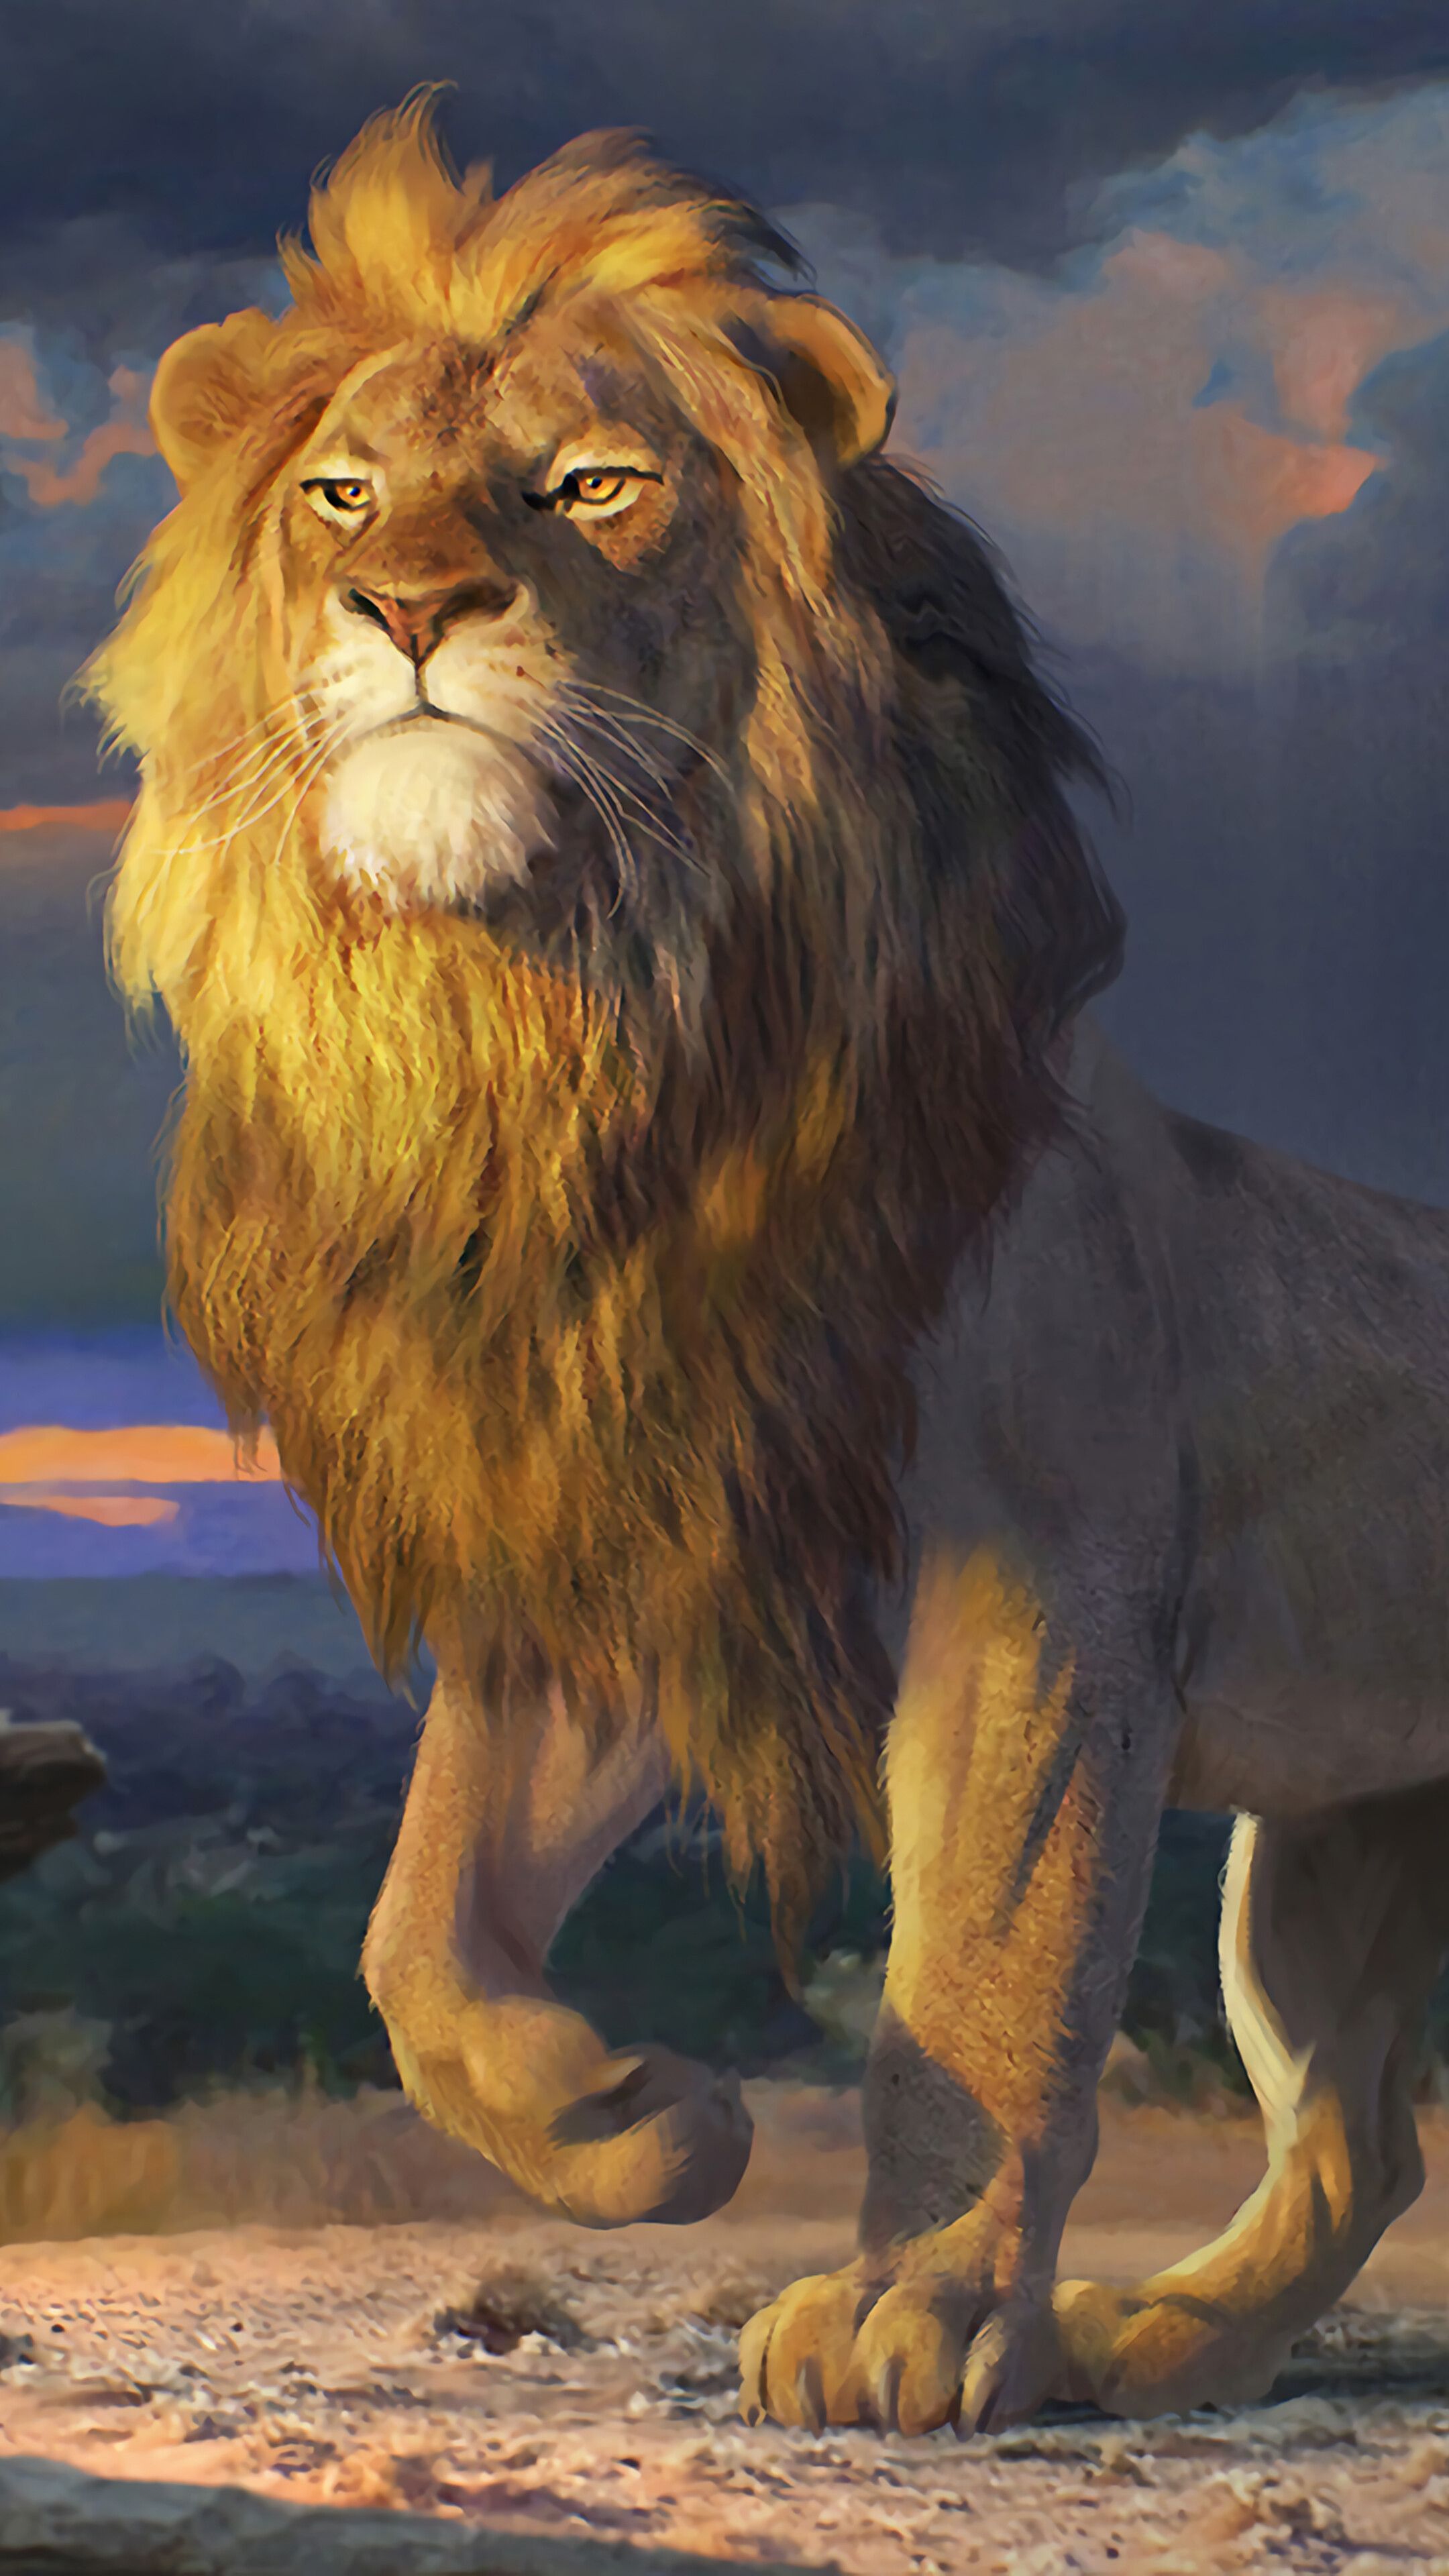 307538 The Lion King, Movie, Simba, 2019, 4K wallpapers